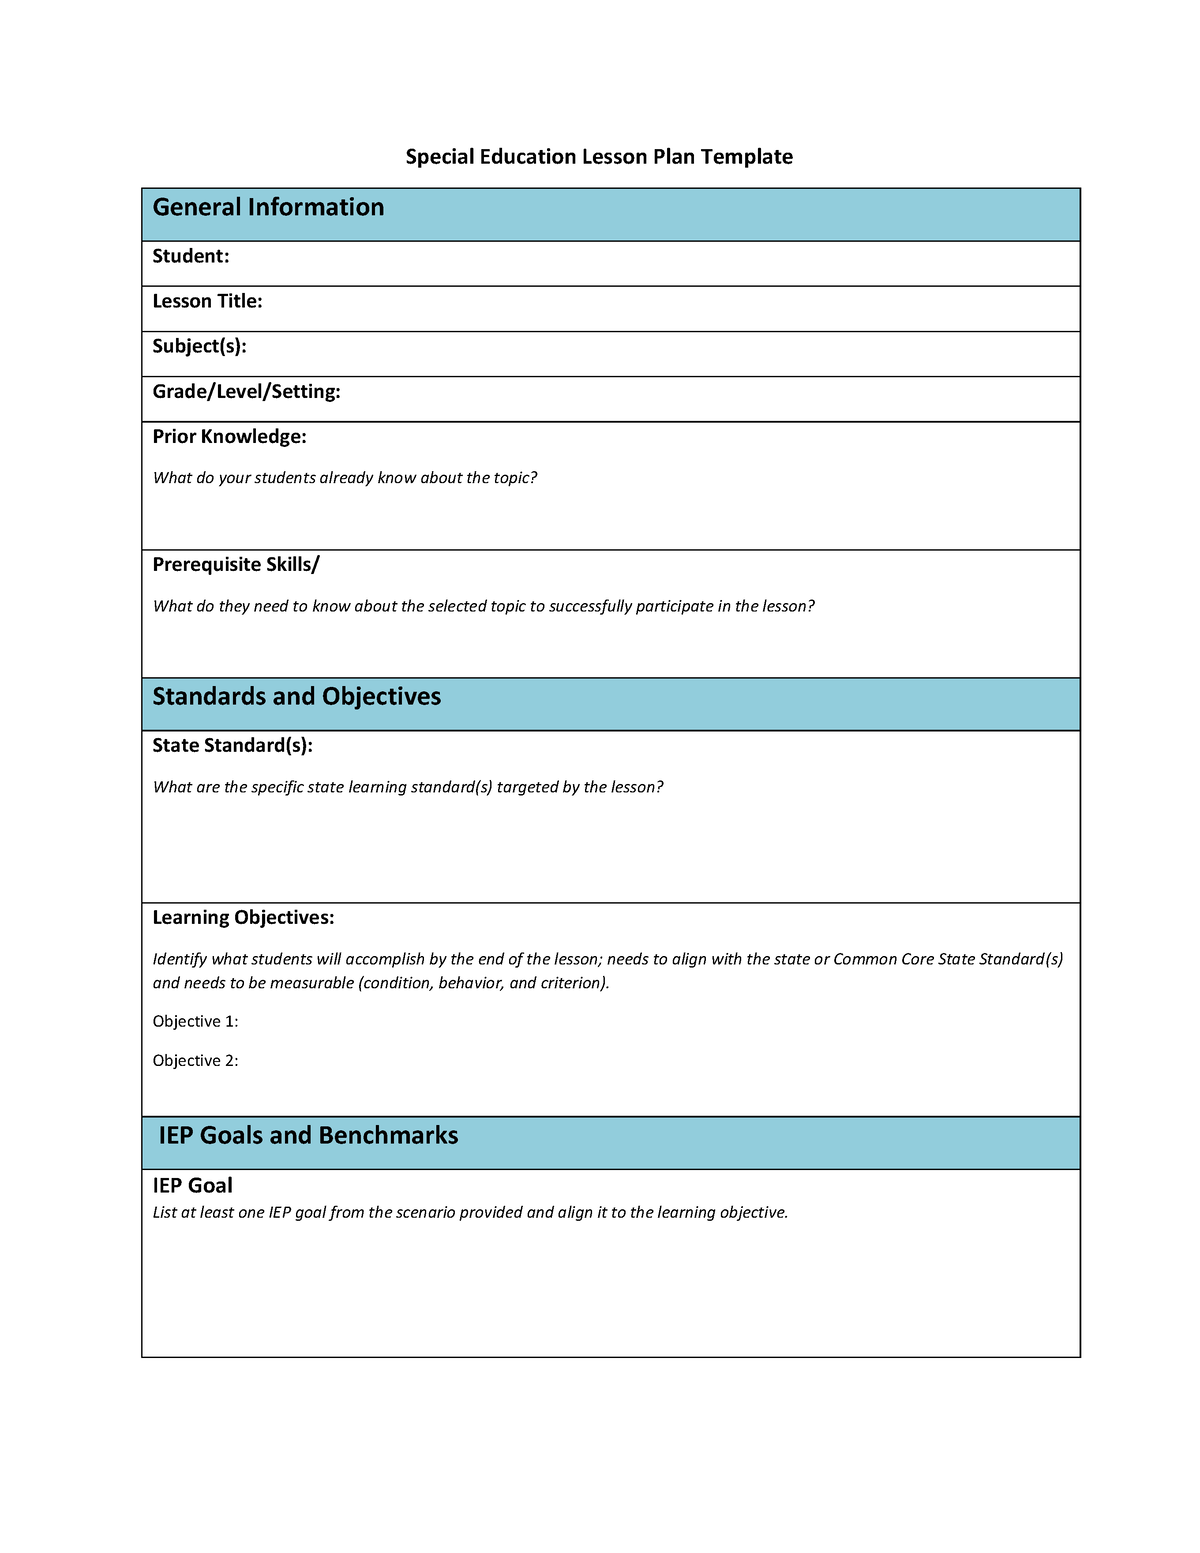 Special Education Lesson Plan Template - Objective 1: Objective 2: IEP ...